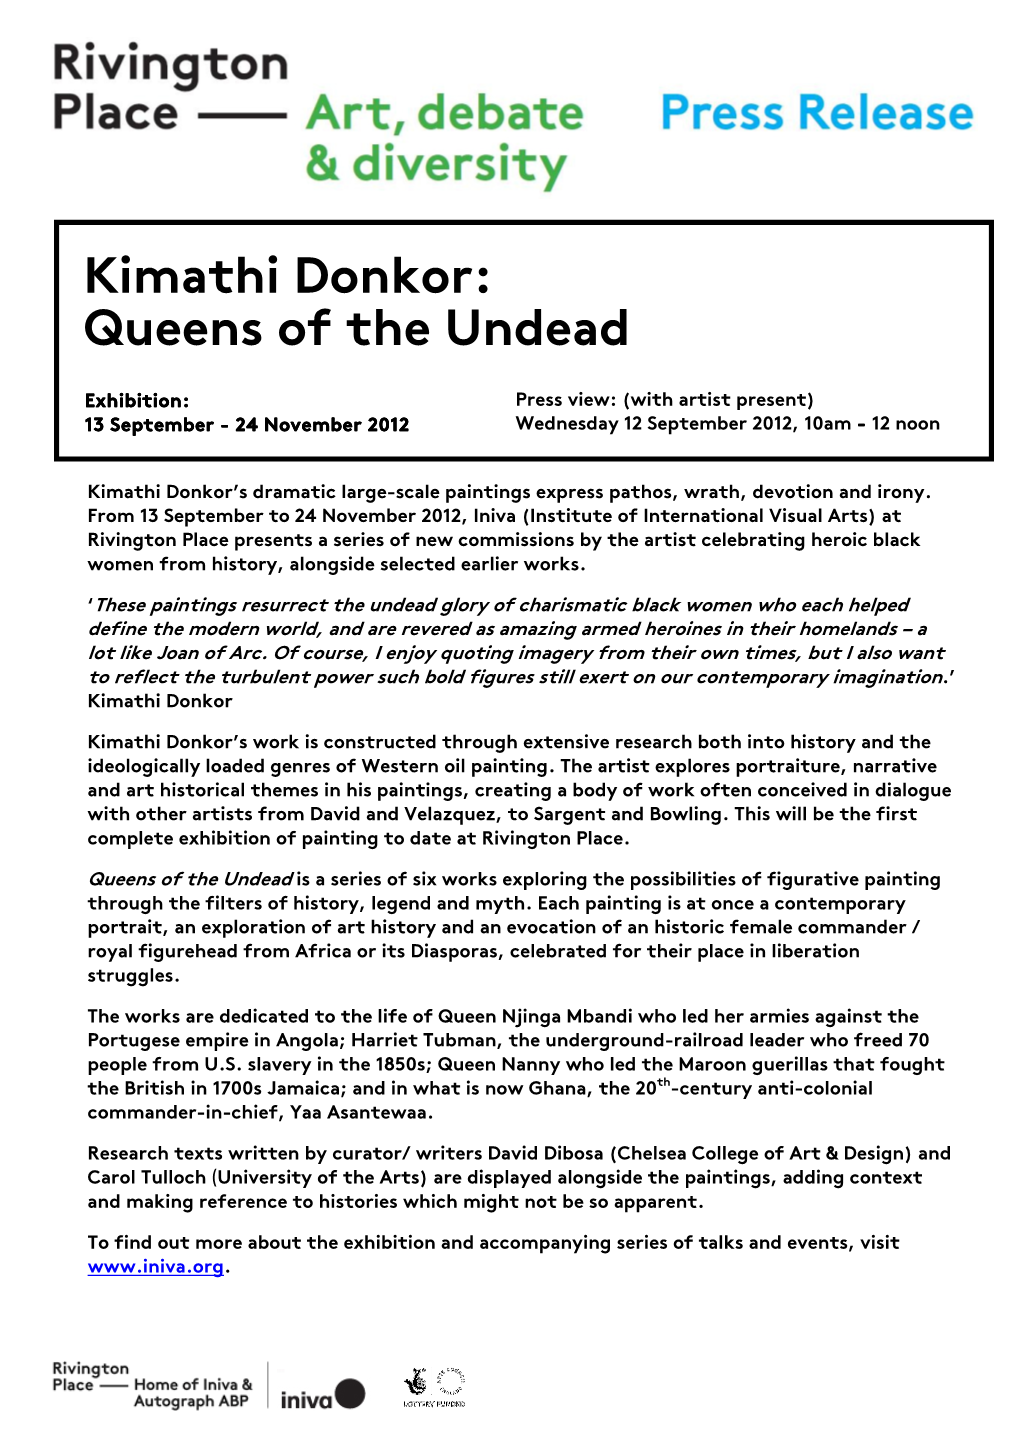 Kimathi Donkor: Queens of the Undead